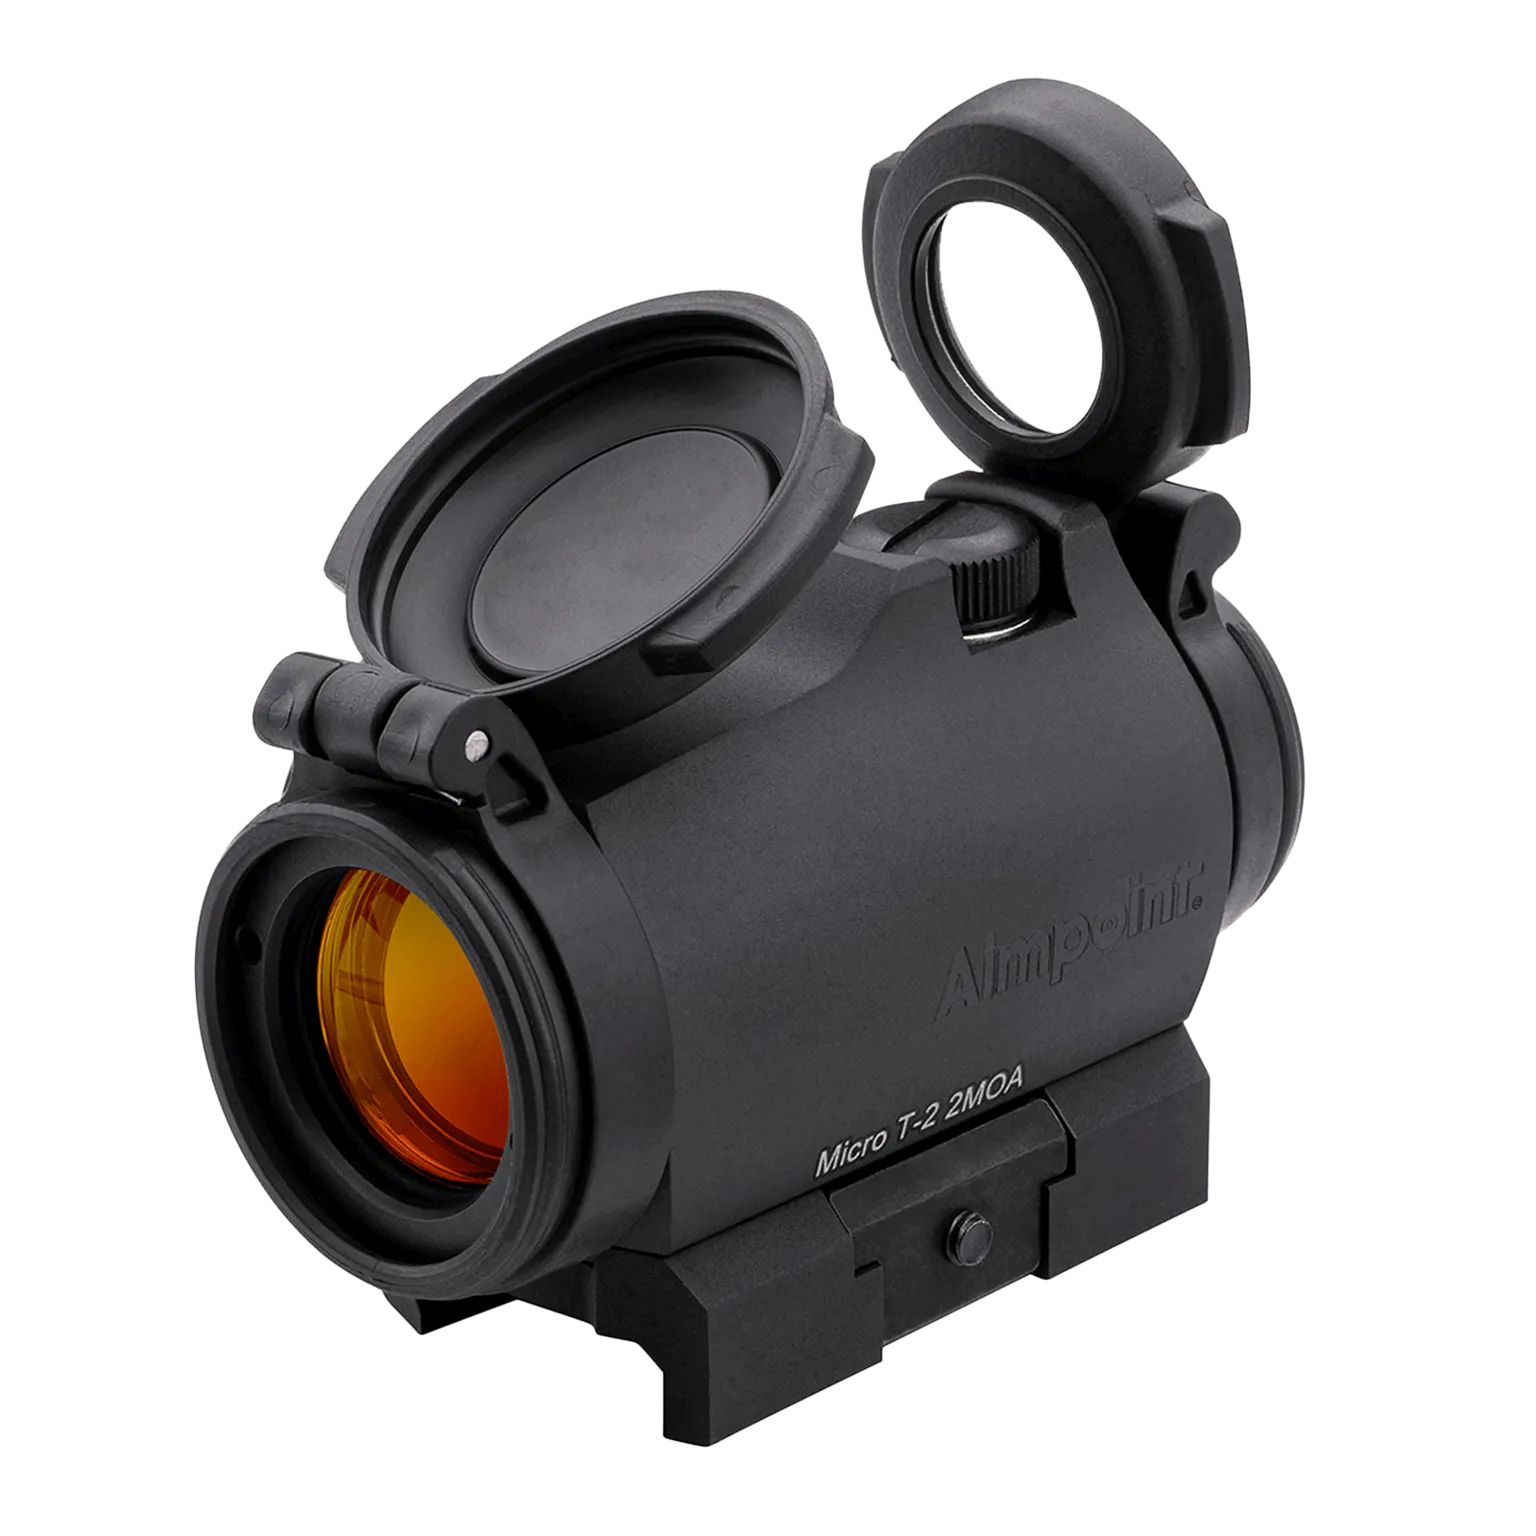 Micro T-2™ 2 MOA - Red dot reflex sight with standard mount for